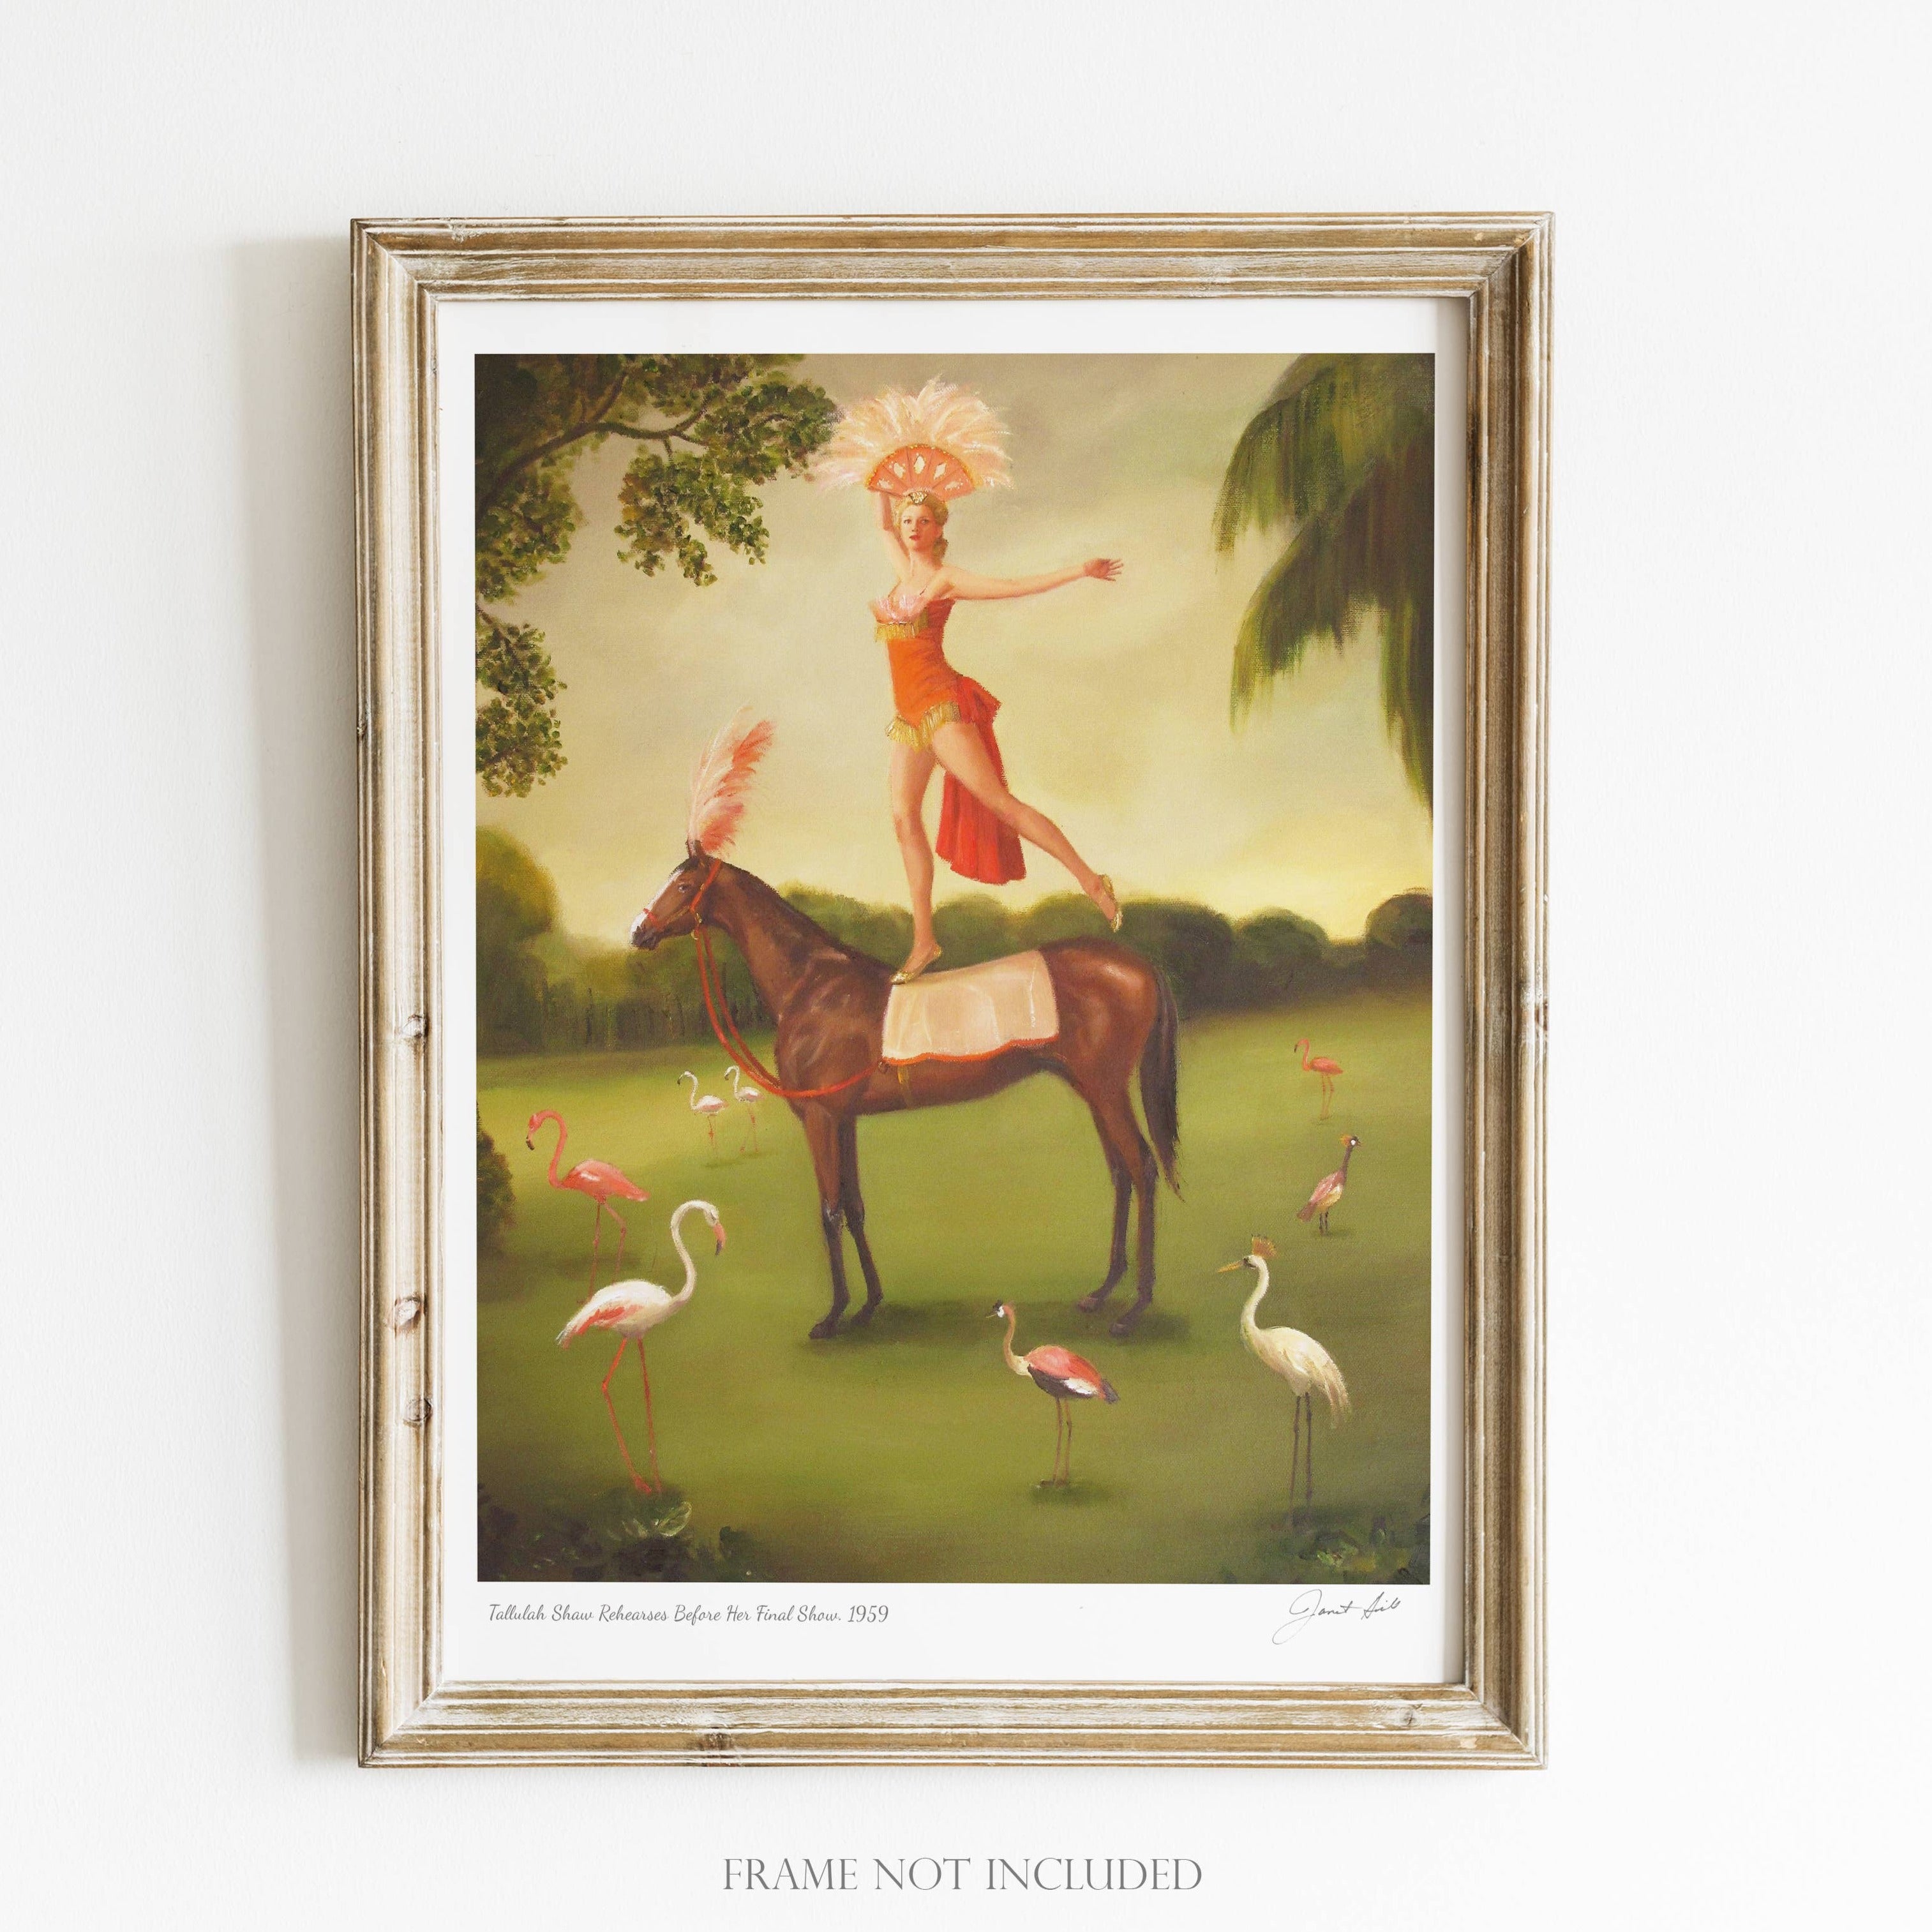 Colourful art print of 1920's dressed woman, balancing on top of horse. Flamingos in foreground and background.